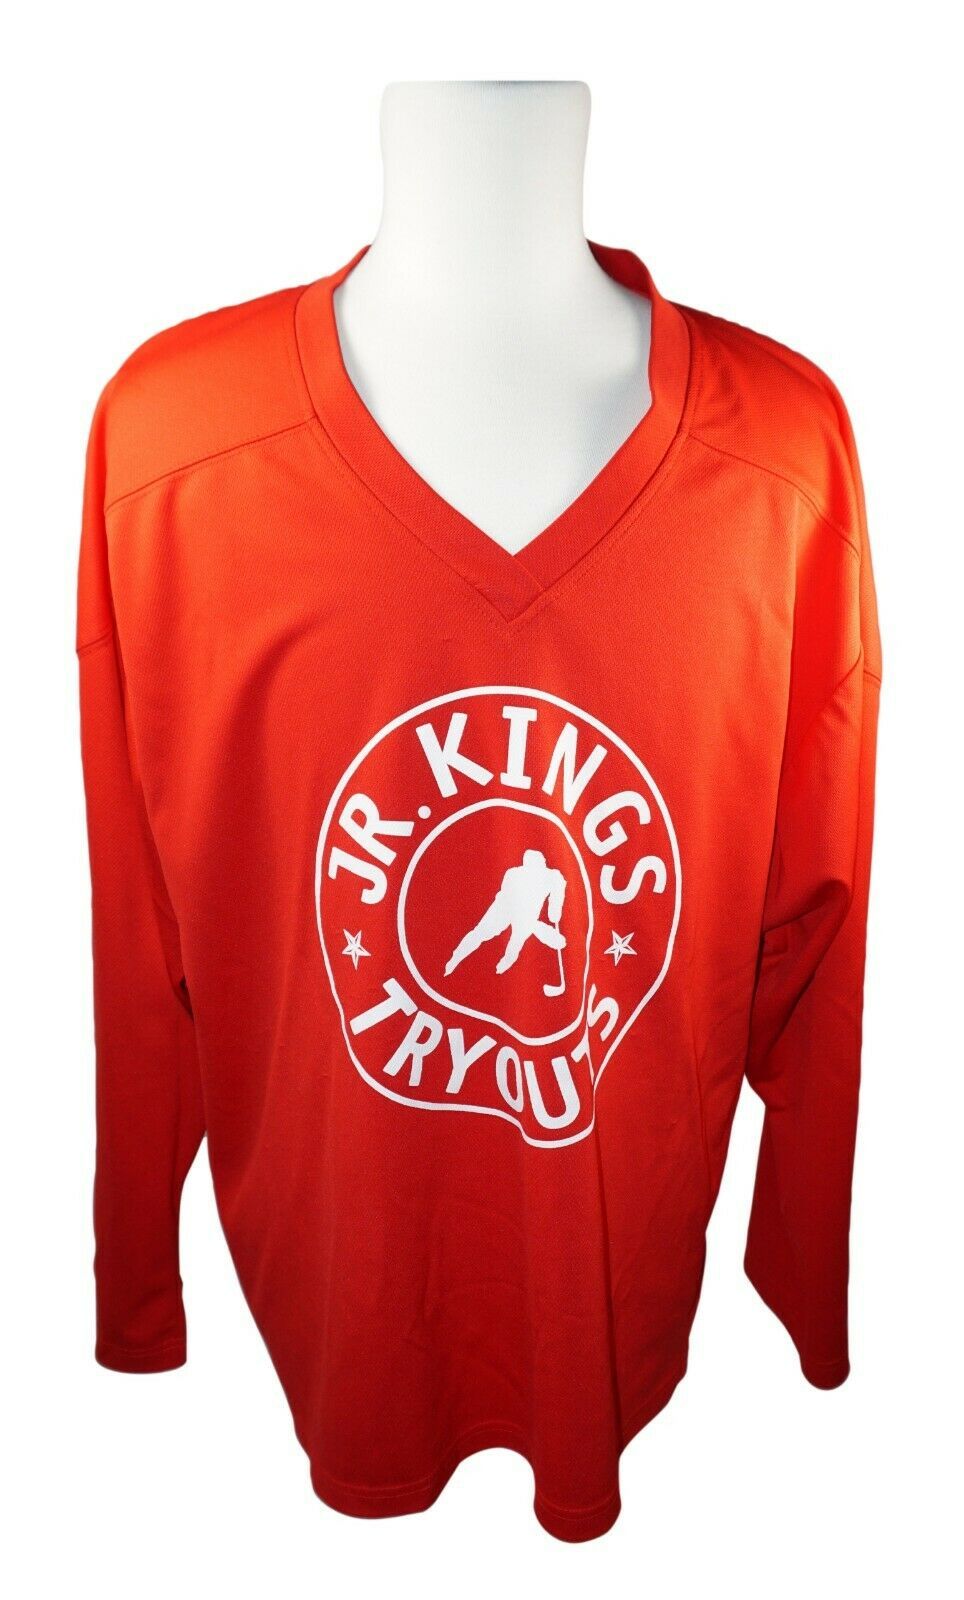 TRON SR L RED HOCKEY JERSEY - ADULT LARGE JR KINGS TRYOUT USED - $9.00